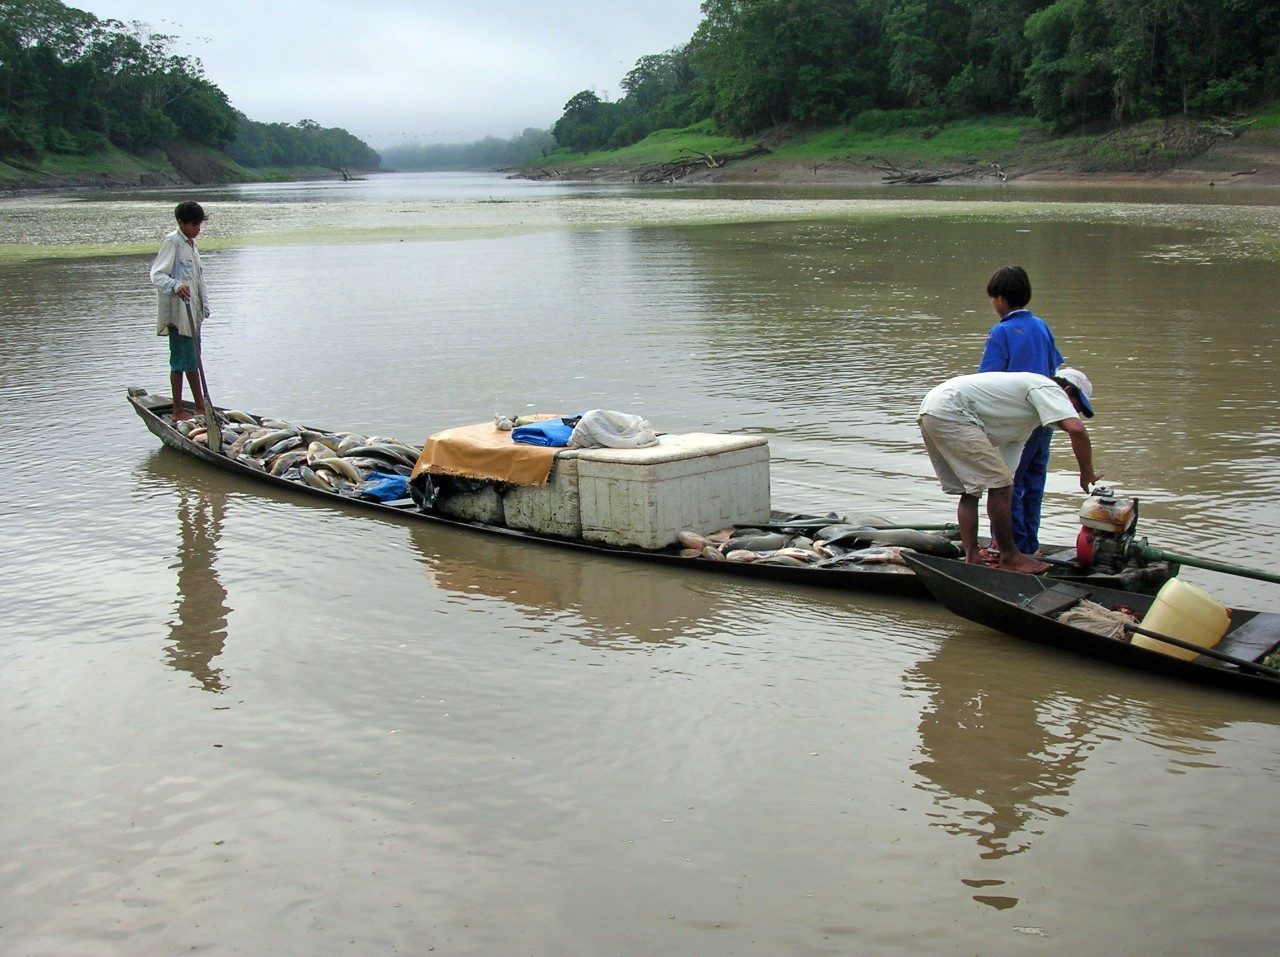 A riverine fisherman and his sons return from a good day of fishing for tambaqui (Colossoma macropomum), one of the Amazon’s most high-value fish species dependent on the floodplains.